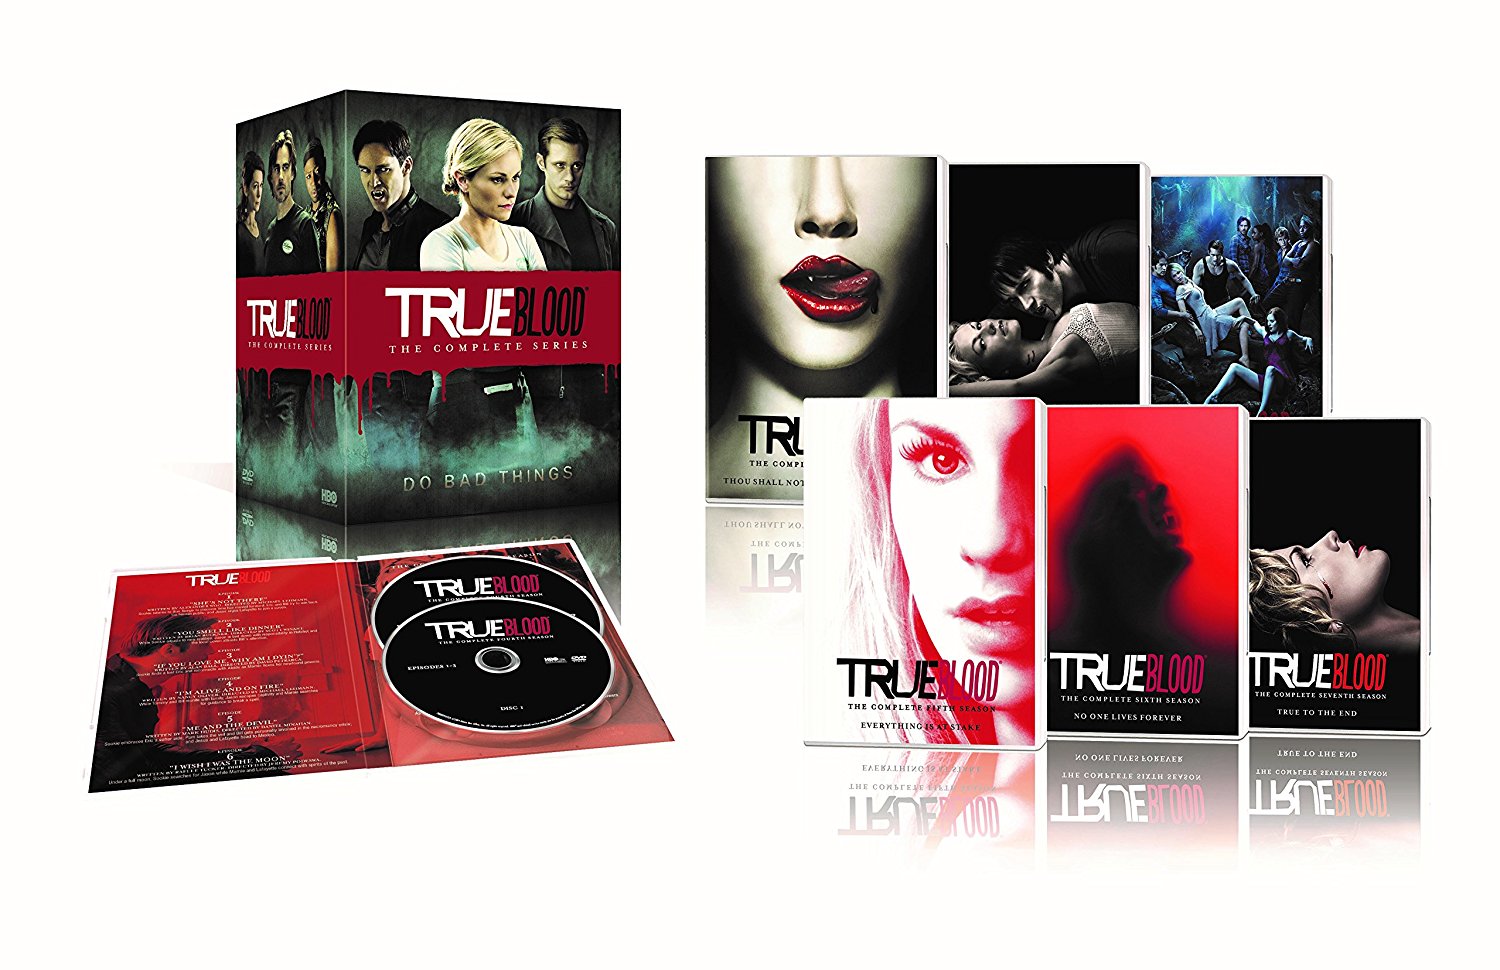 Save on “True Blood” on Blu-ray and DVD – $75.99 – $87.99!